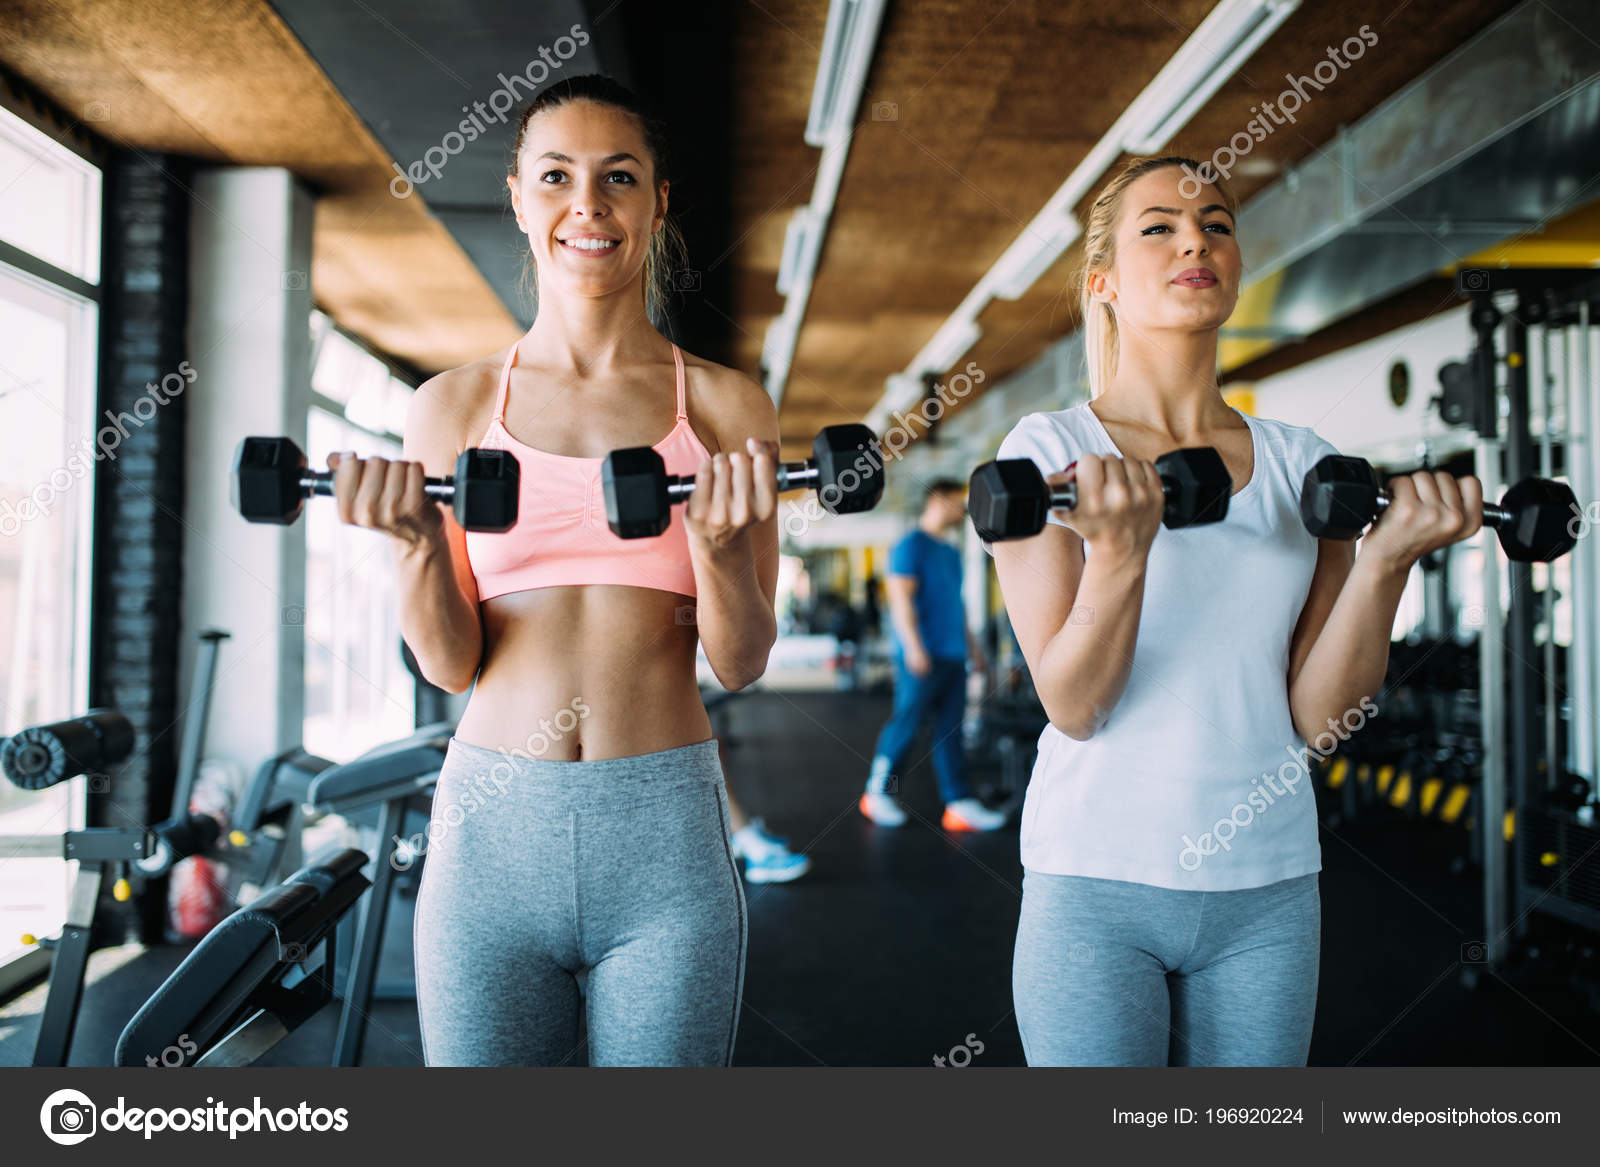 Picture Two Beautiful Fitness Women Gym Stock Photo by ©nd3000 216125746